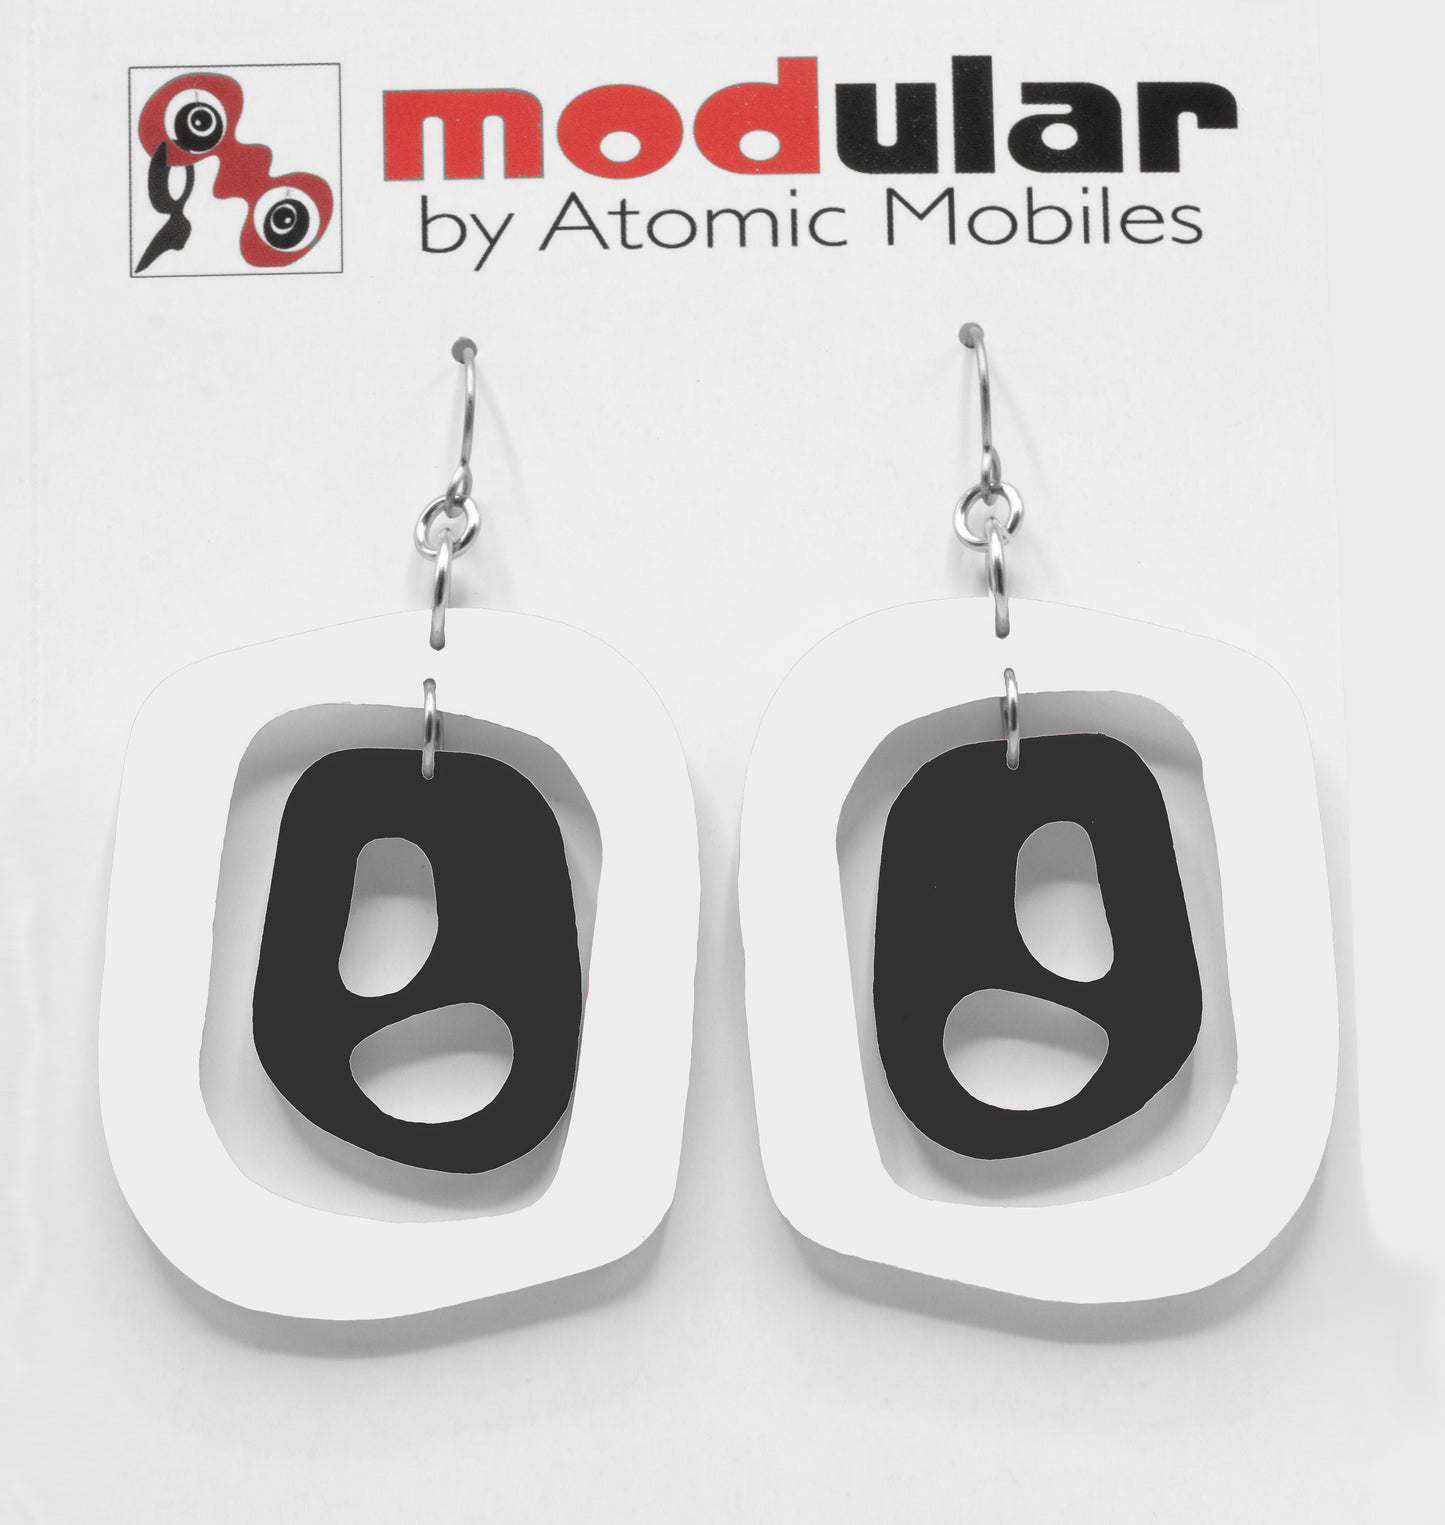 MODular Earrings - Mid 20th Statement Earrings in White and Black by AtomicMobiles.com - retro era mod handmade jewelry